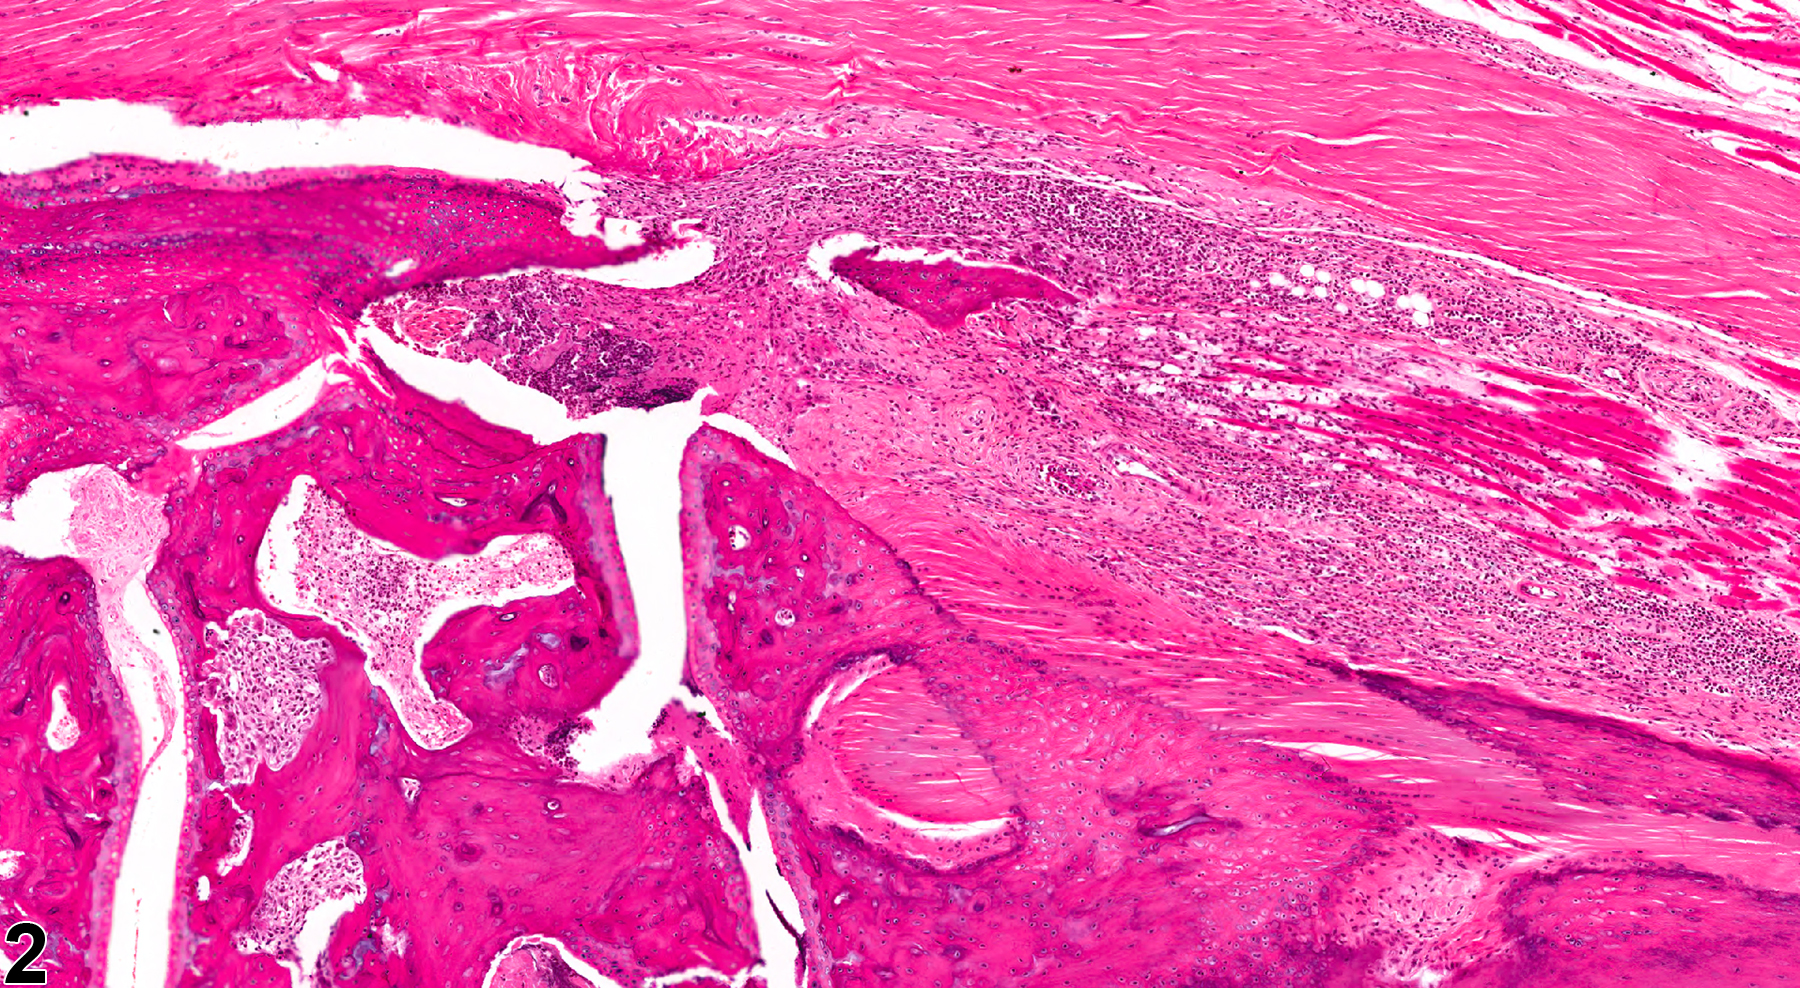 Image of joint inflammation in the bone from a male B6C3F1/N mouse in a chronic study